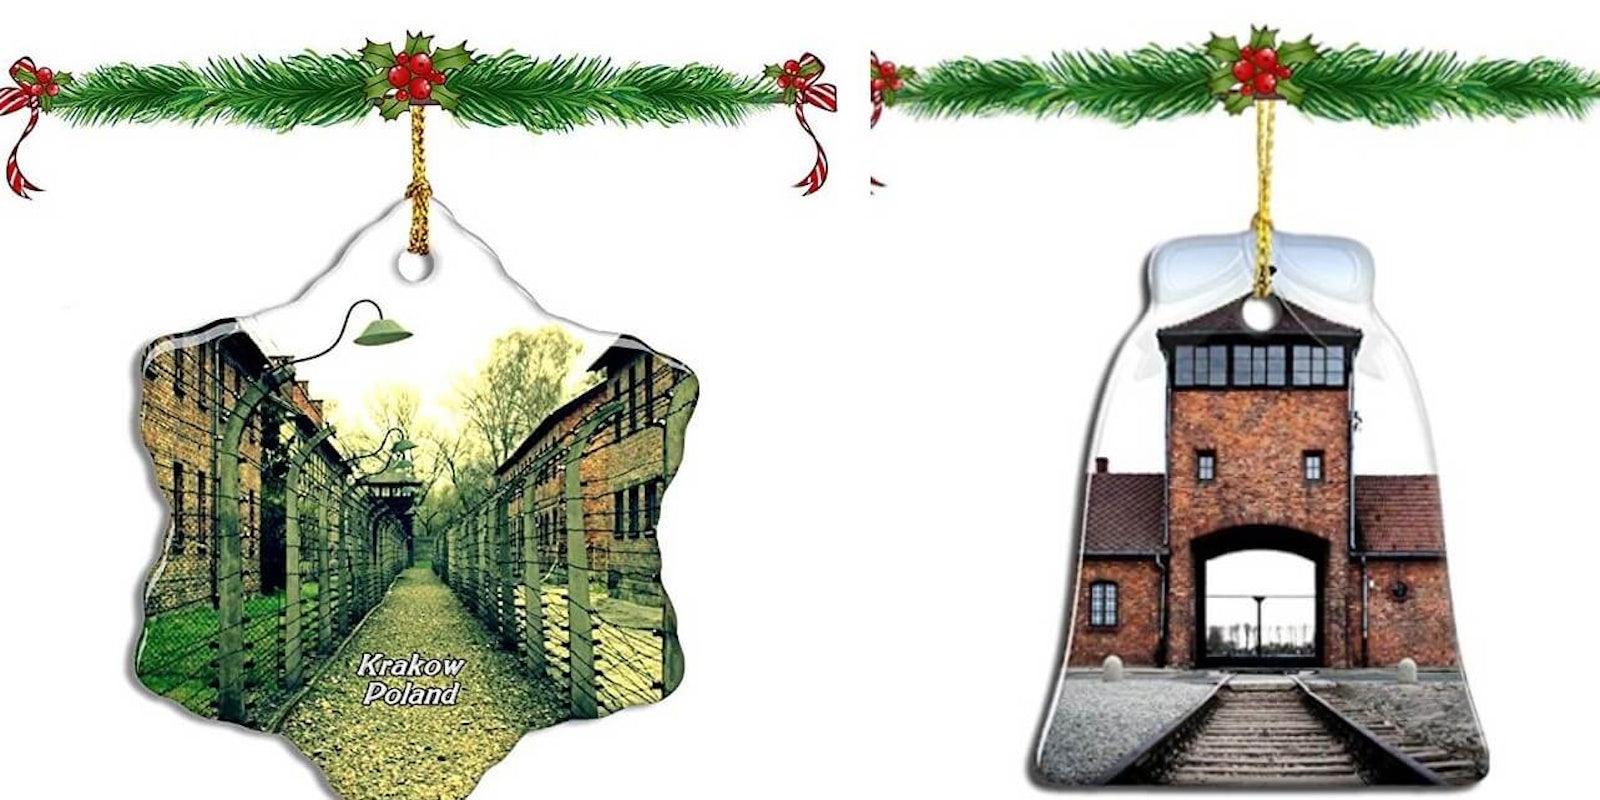 Tree decors showing Auschwitz concentration camp photos